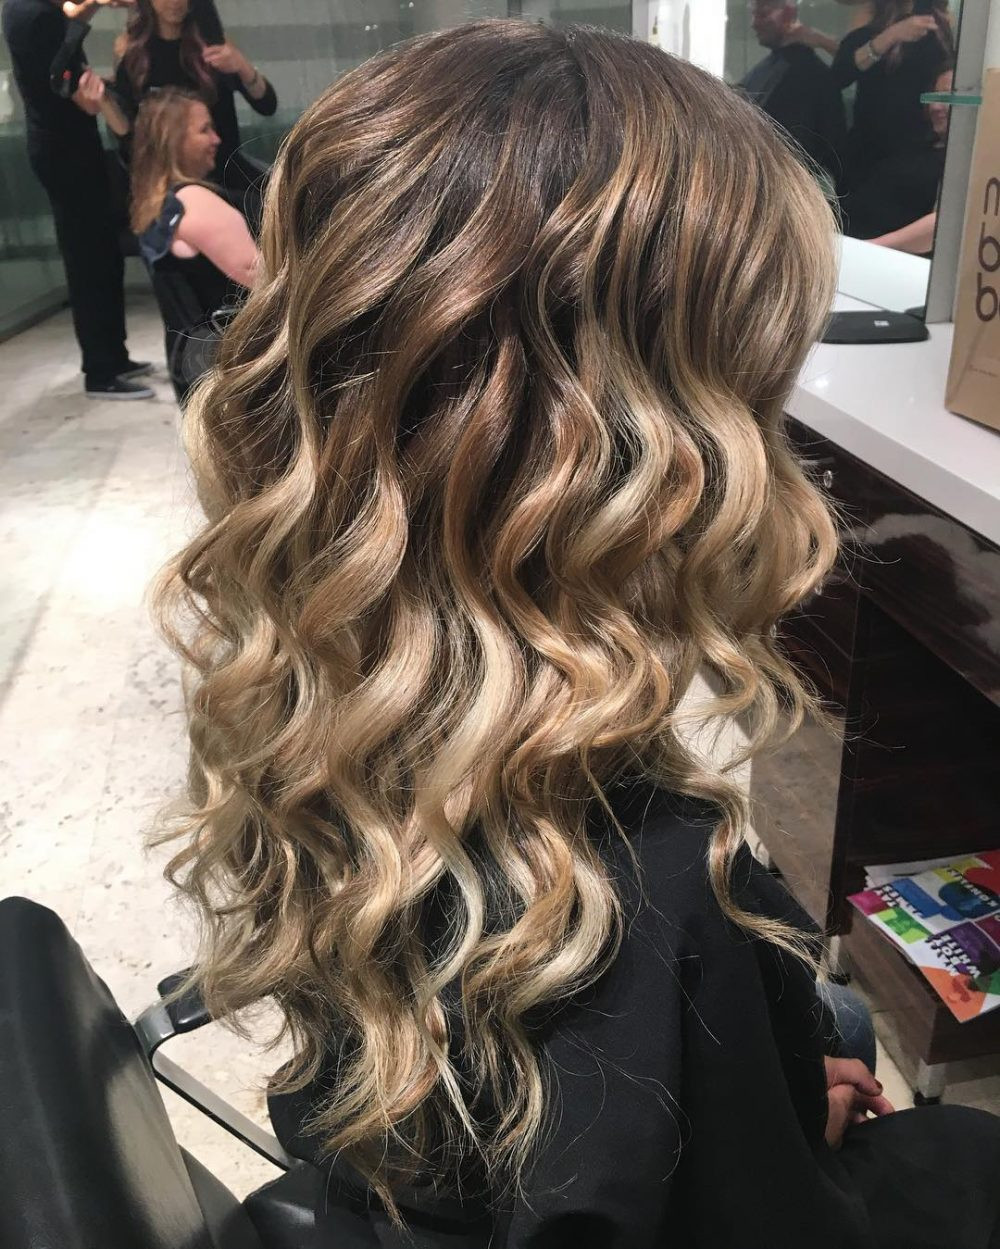 Prom Hairstyles Curled
 18 Stunning Curly Prom Hairstyles for 2019 Updos Down